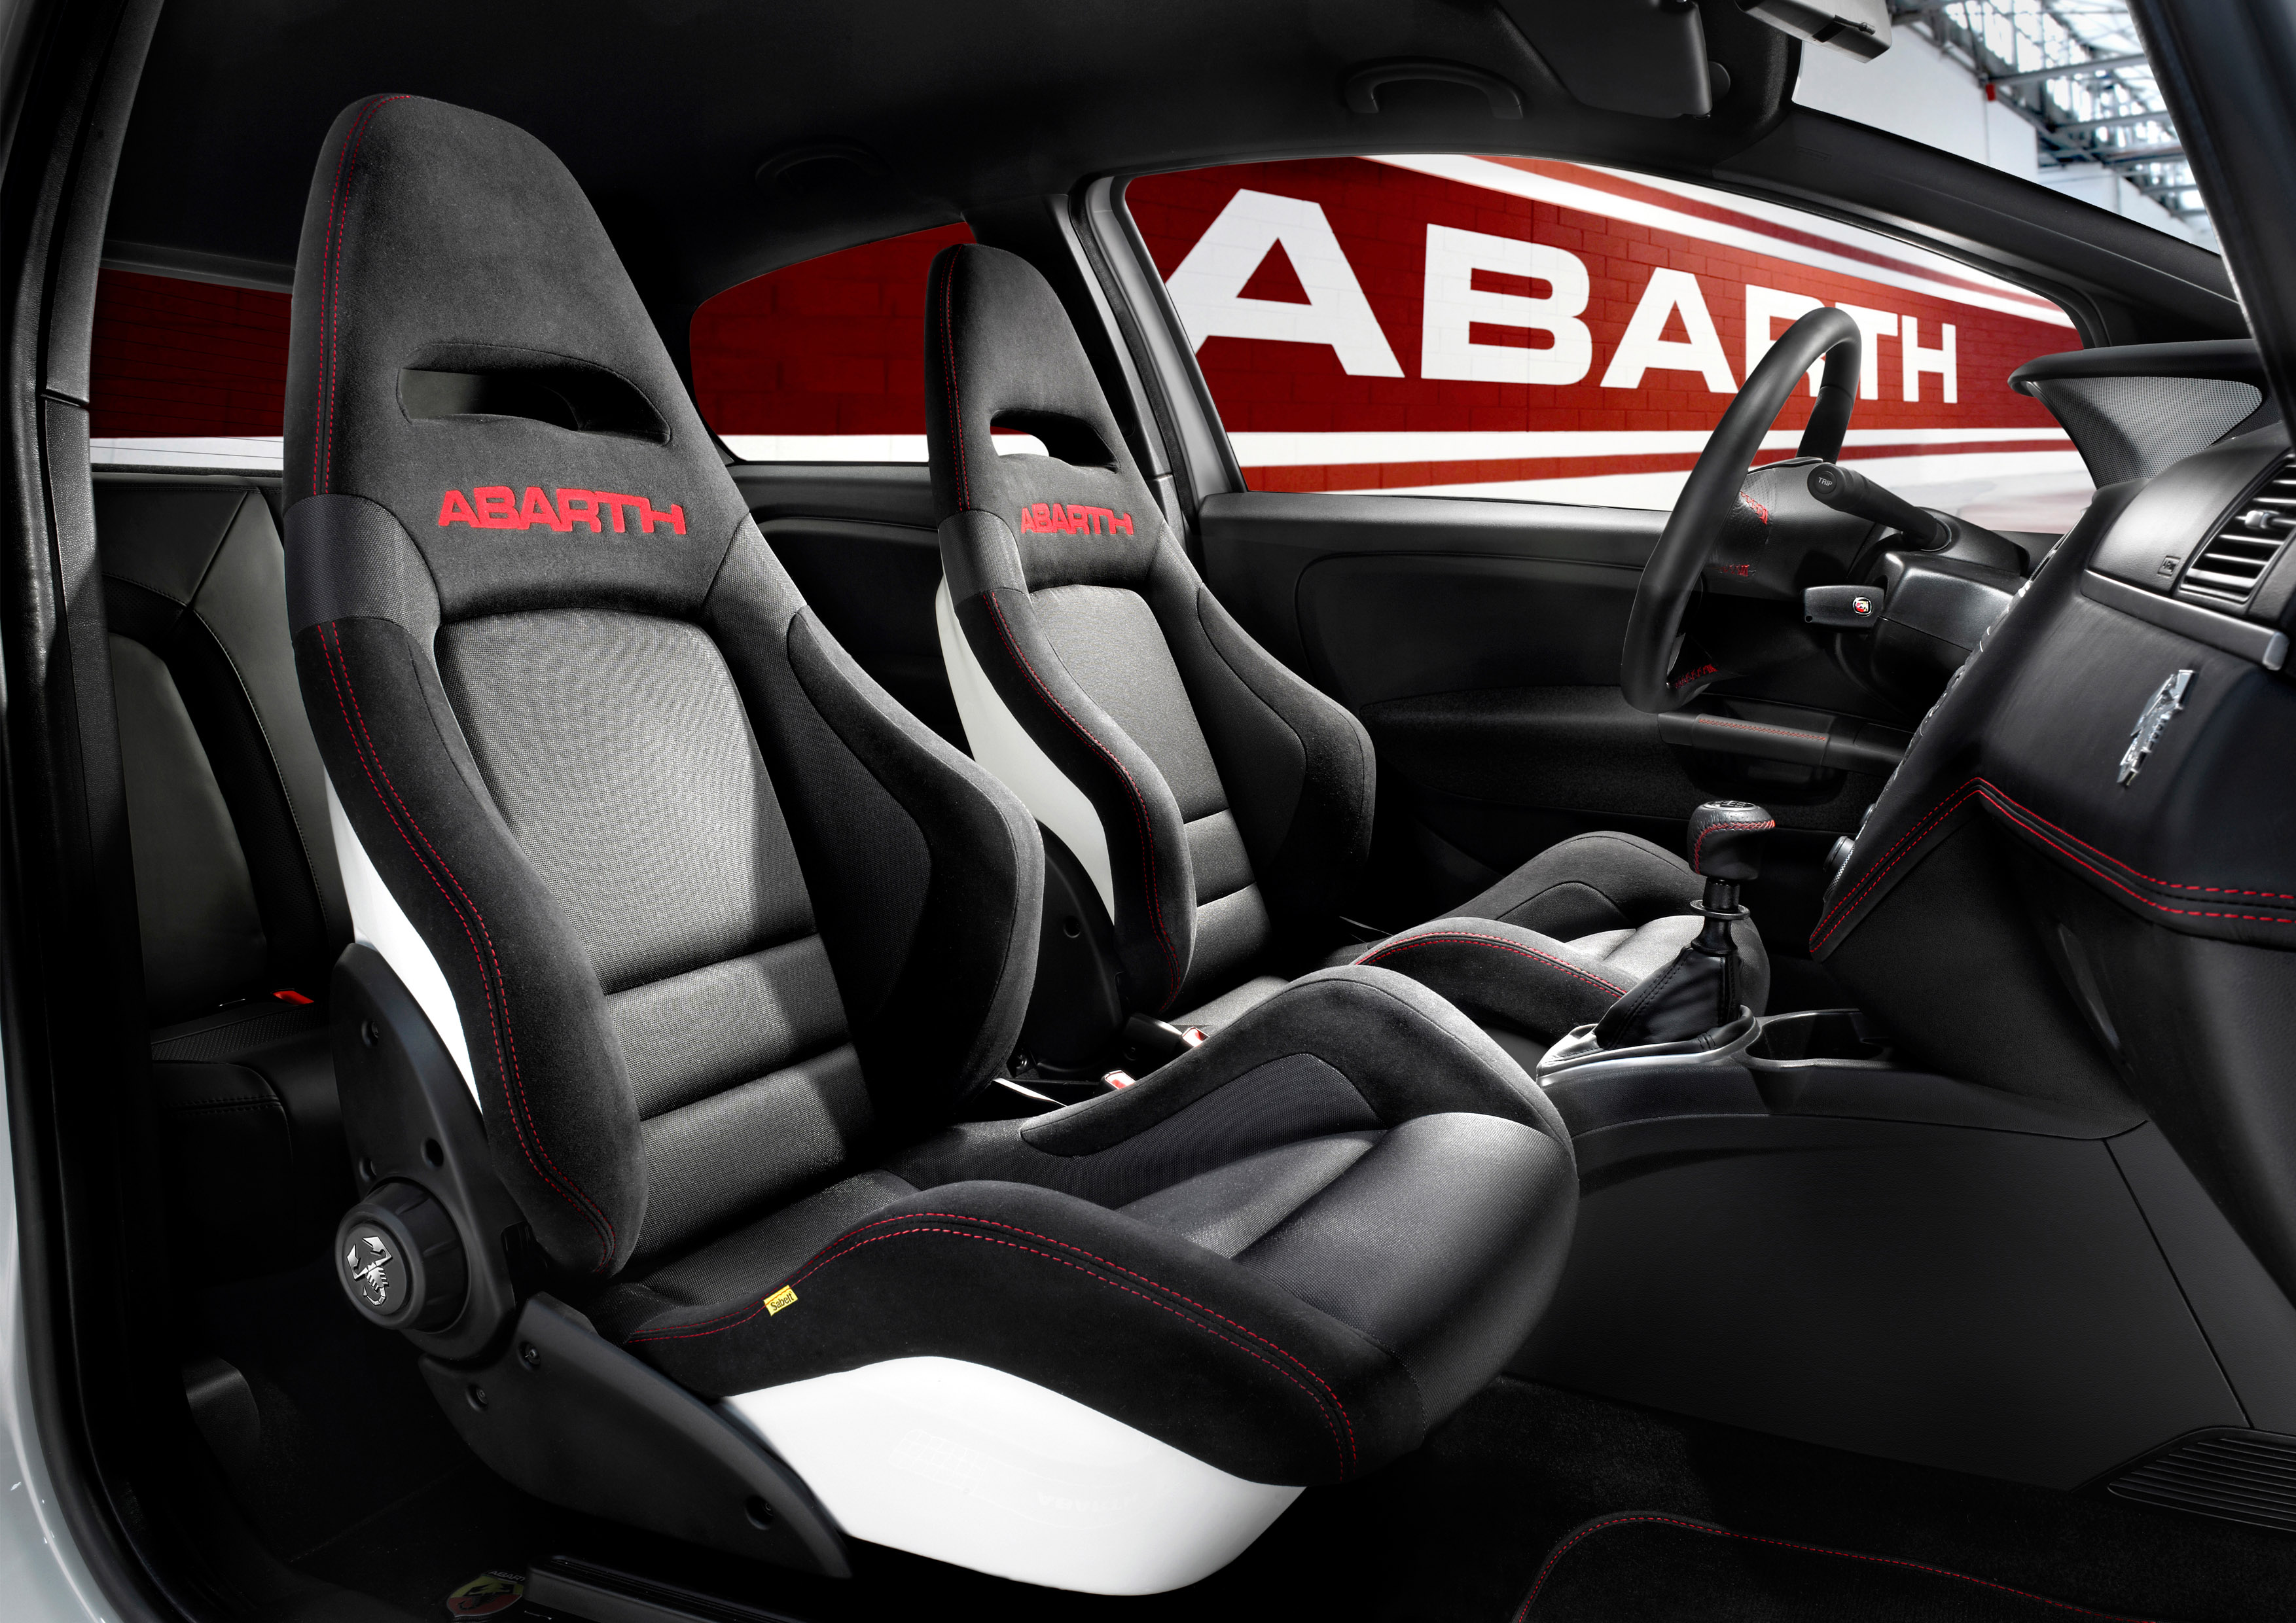 Abarth Corse by Sabelt